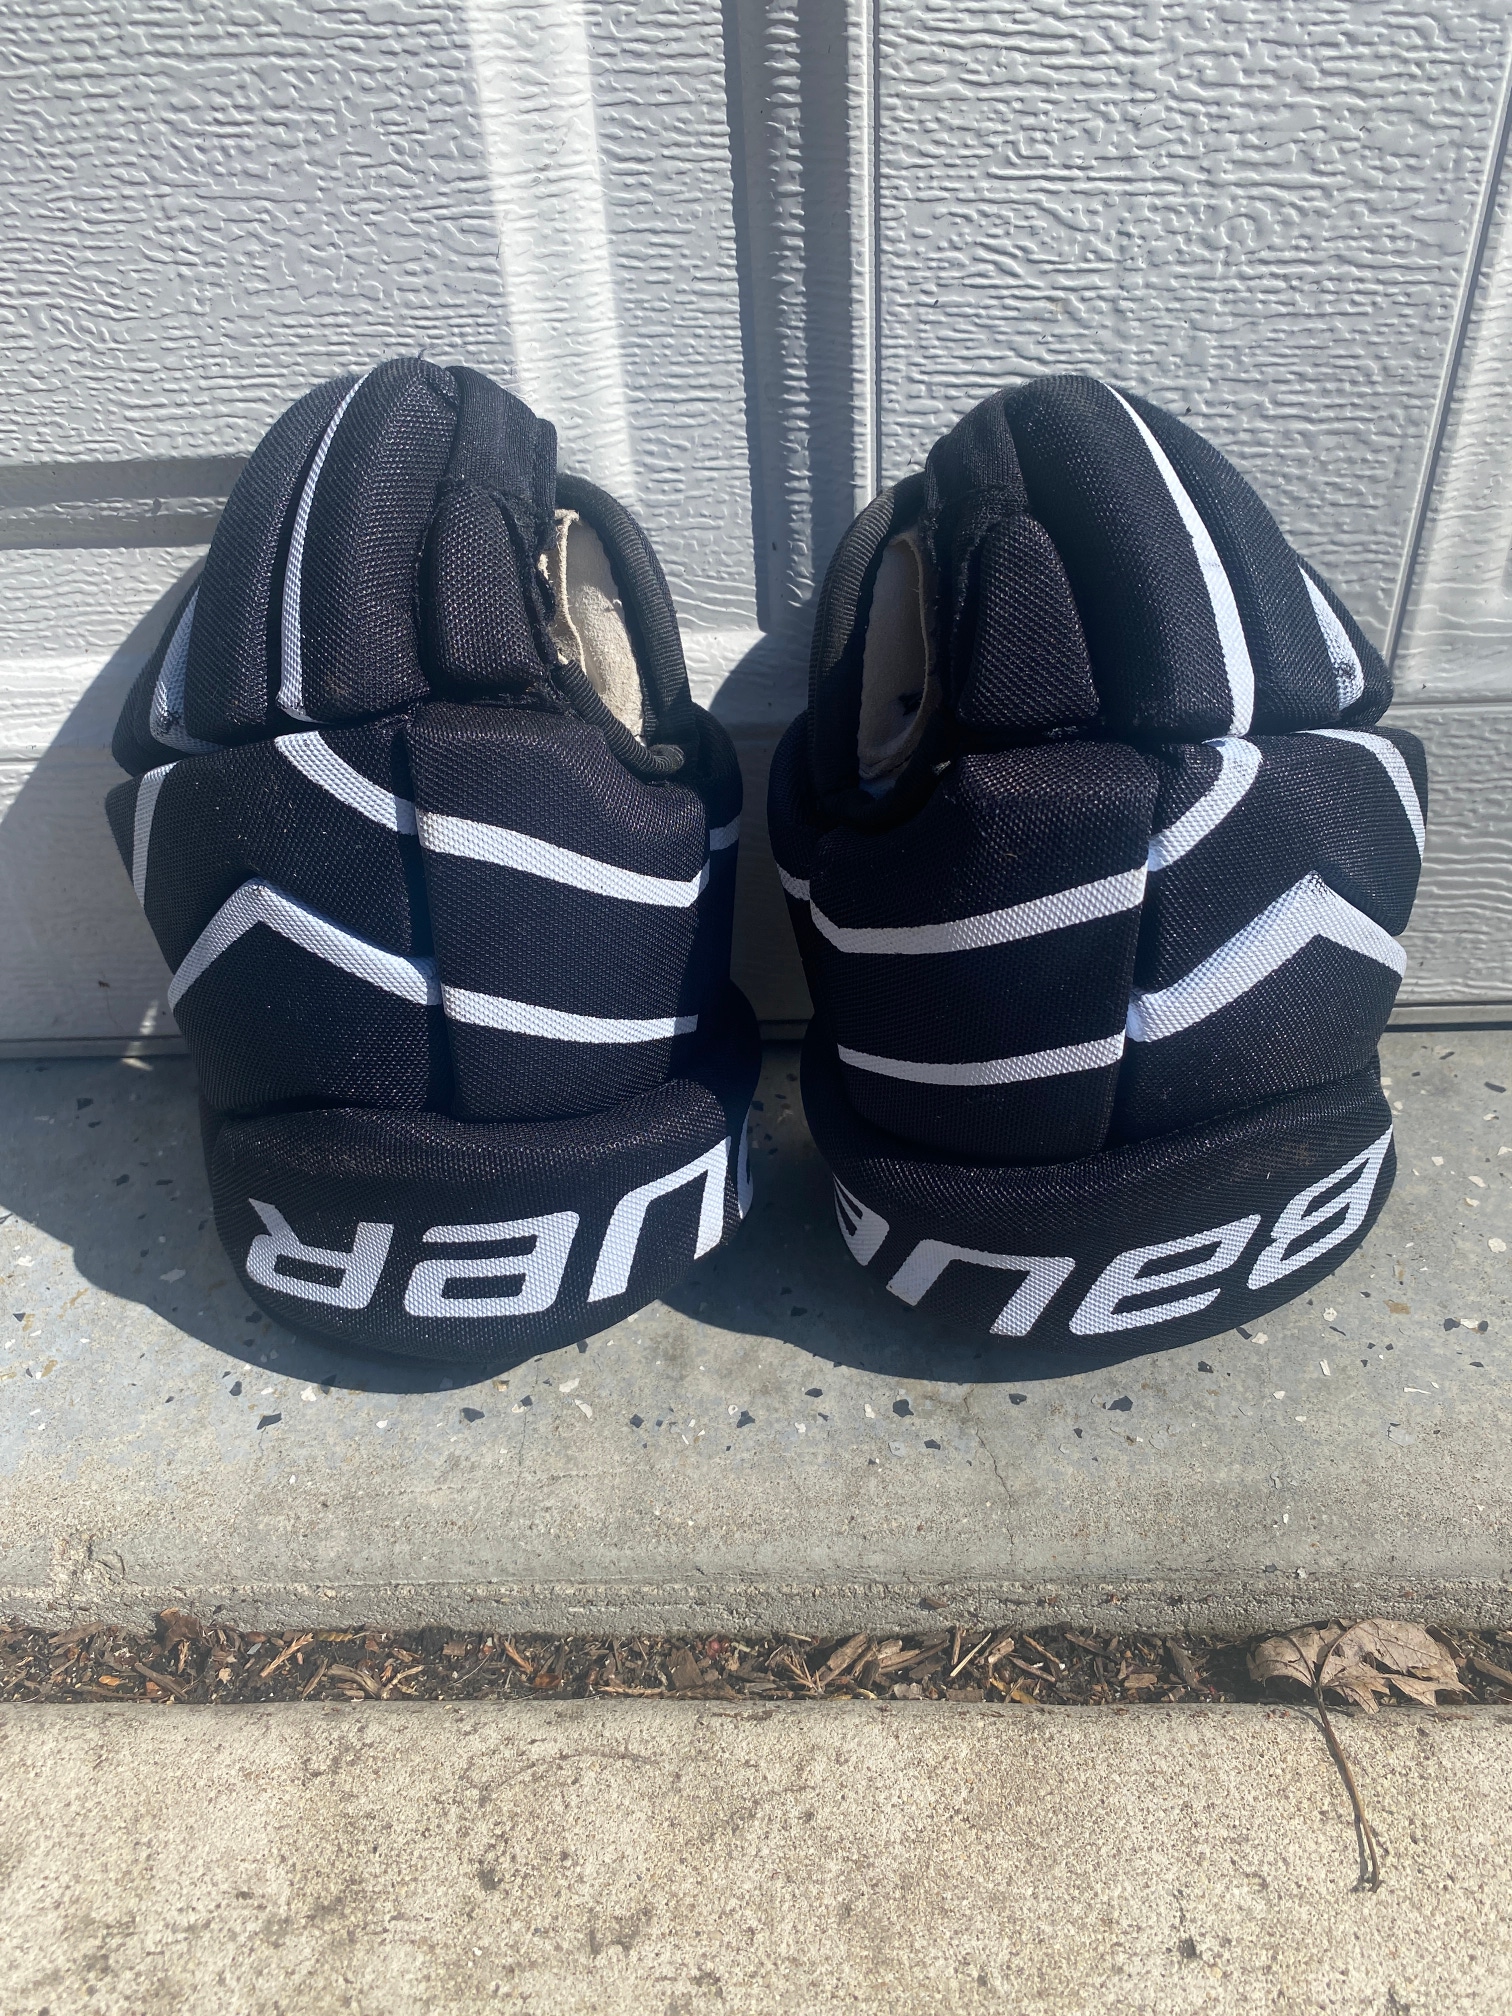 Used Bauer Supreme One.2 Gloves 10"